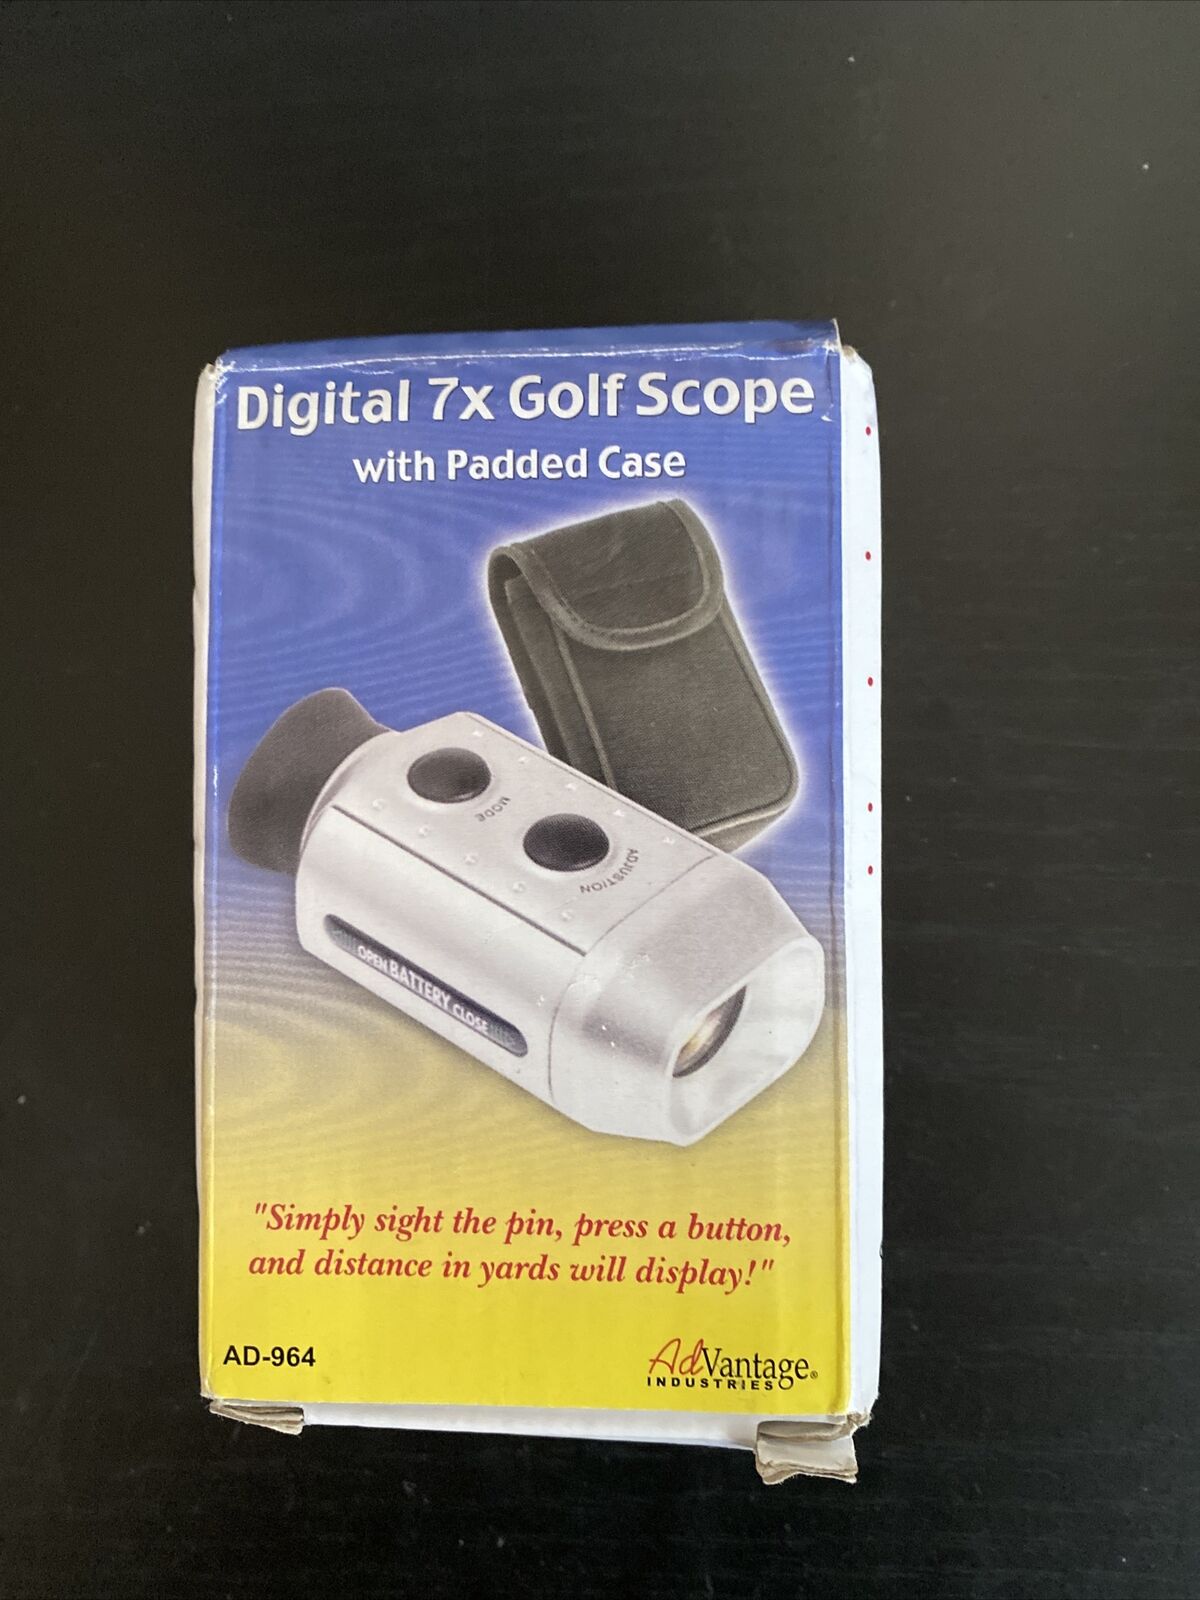 Digital 7x Golf Scope with Padded Case ADVantage Industries New In box